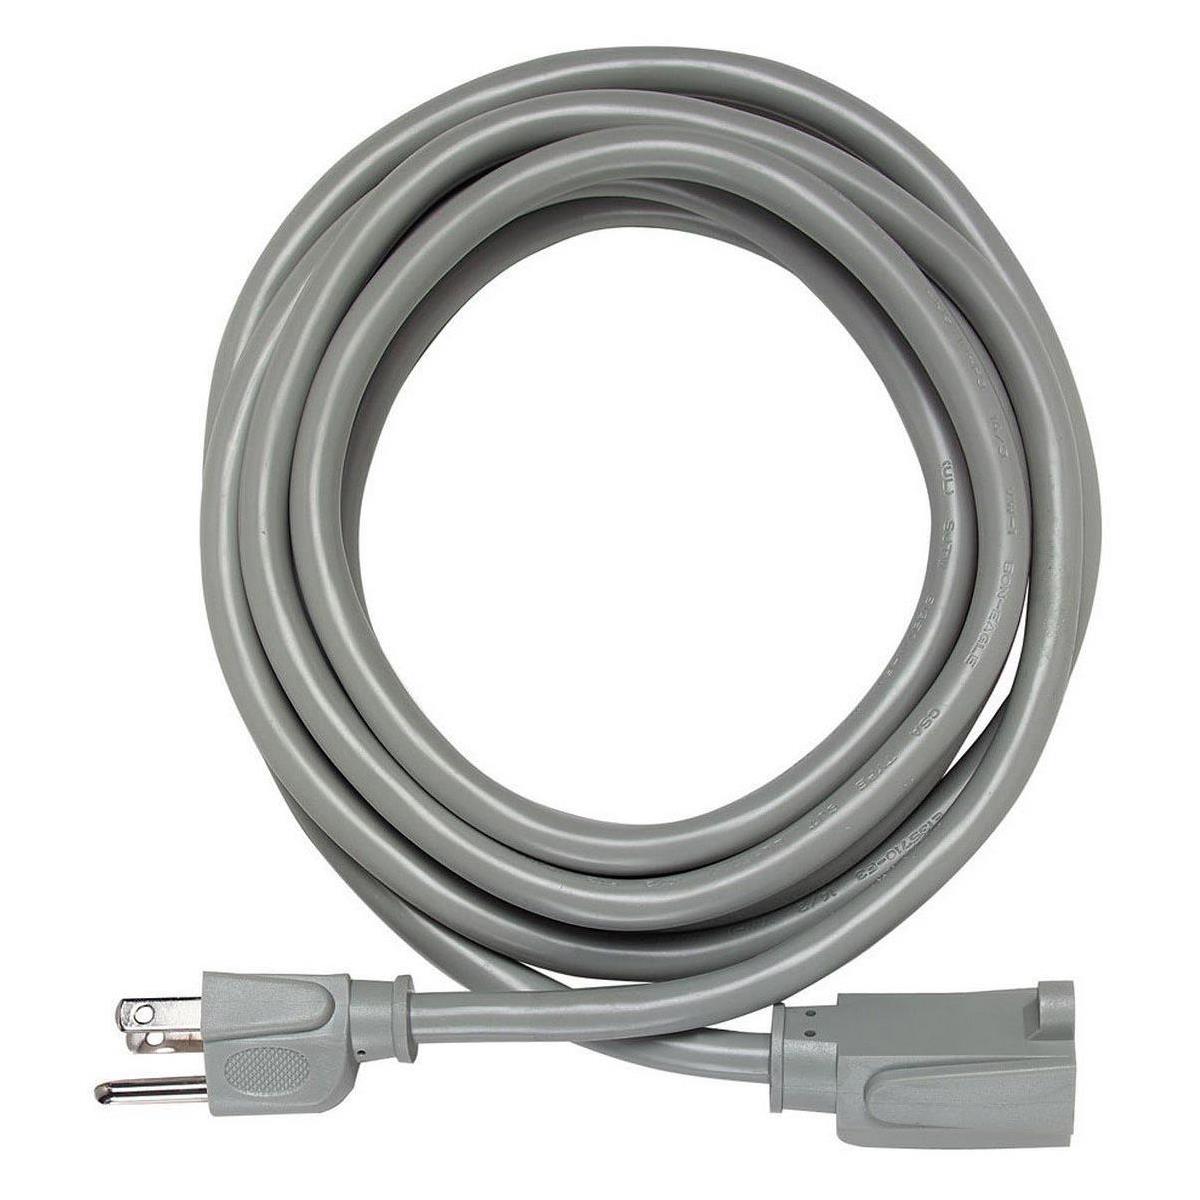 Image of Furman Sound GEC1410 10' 14AWG Extension Cord